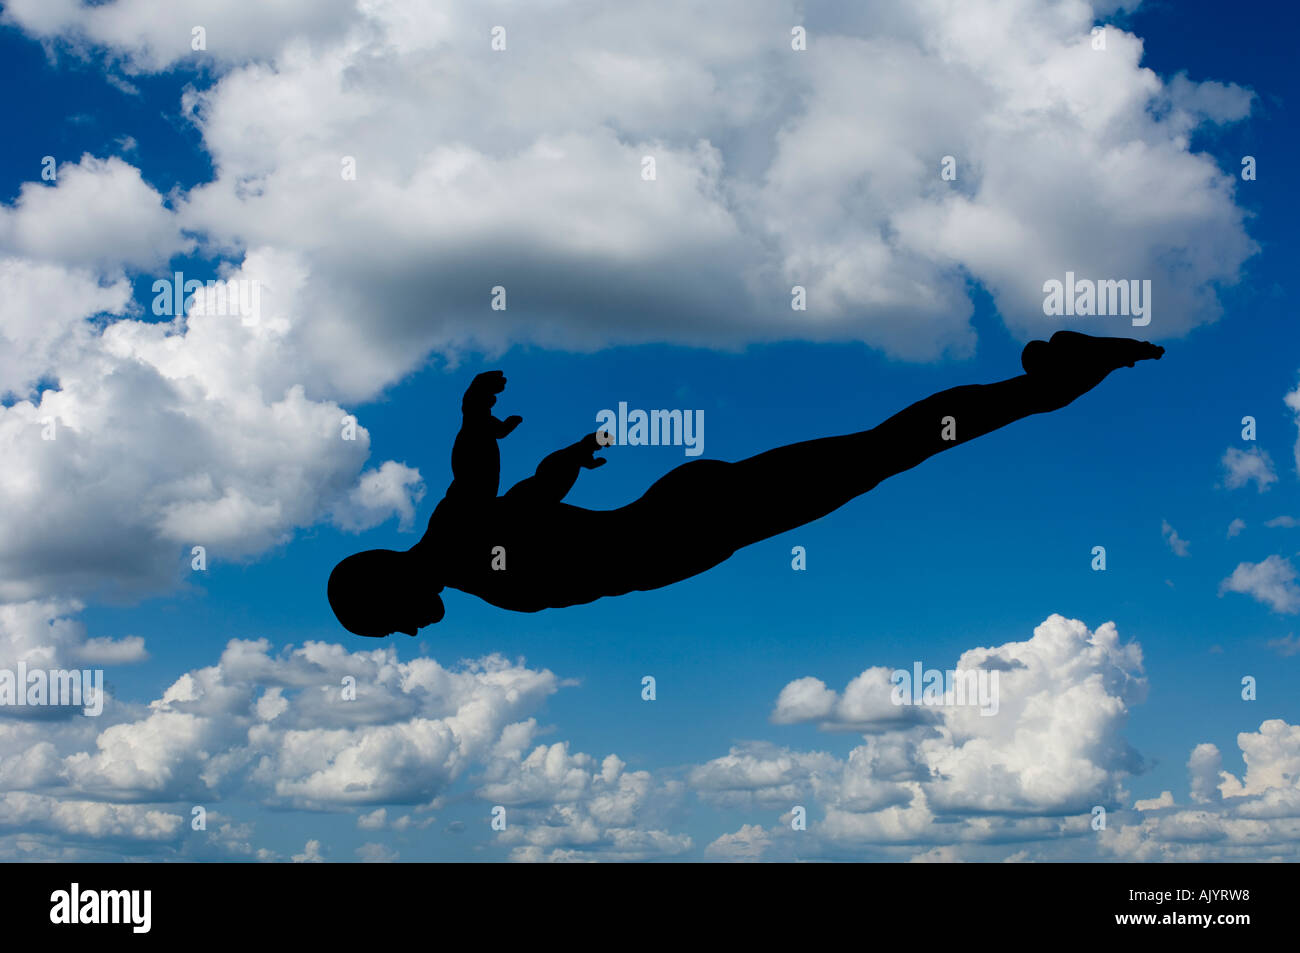 silhouette of man diving with background of blue sky and white clouds Stock Photo